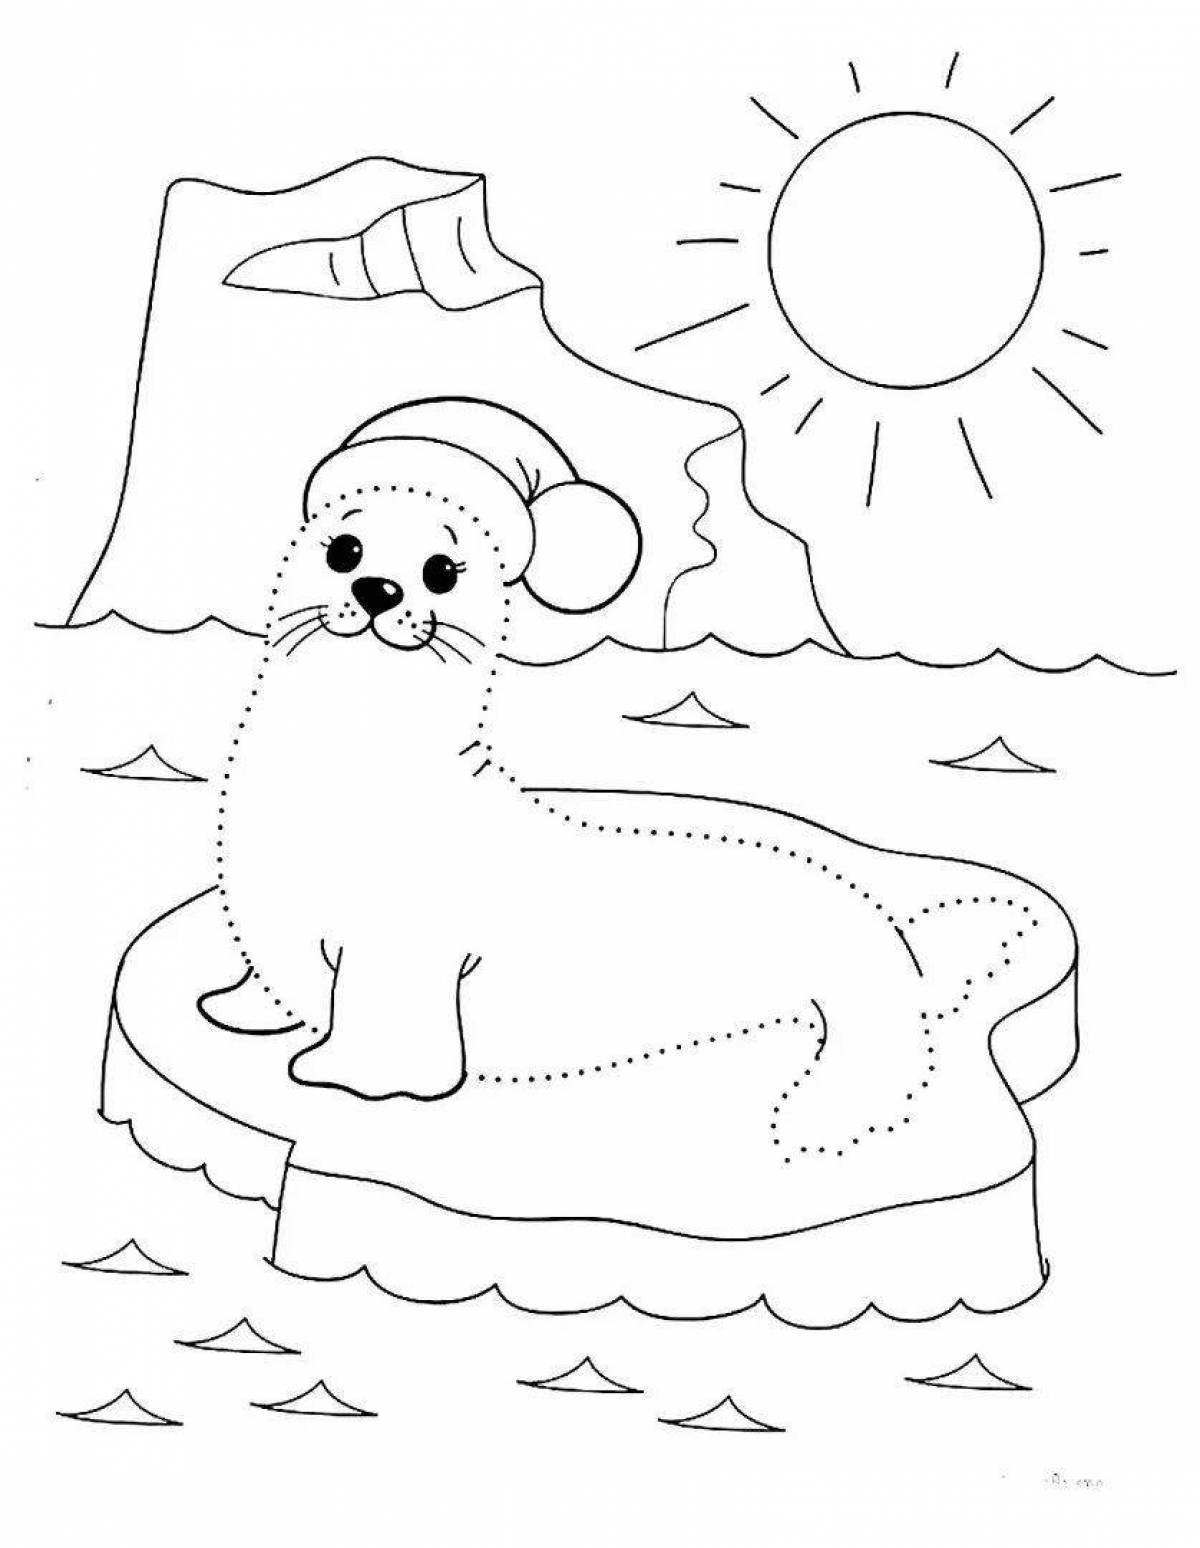 Fun coloring book of the Baikal seal for kids